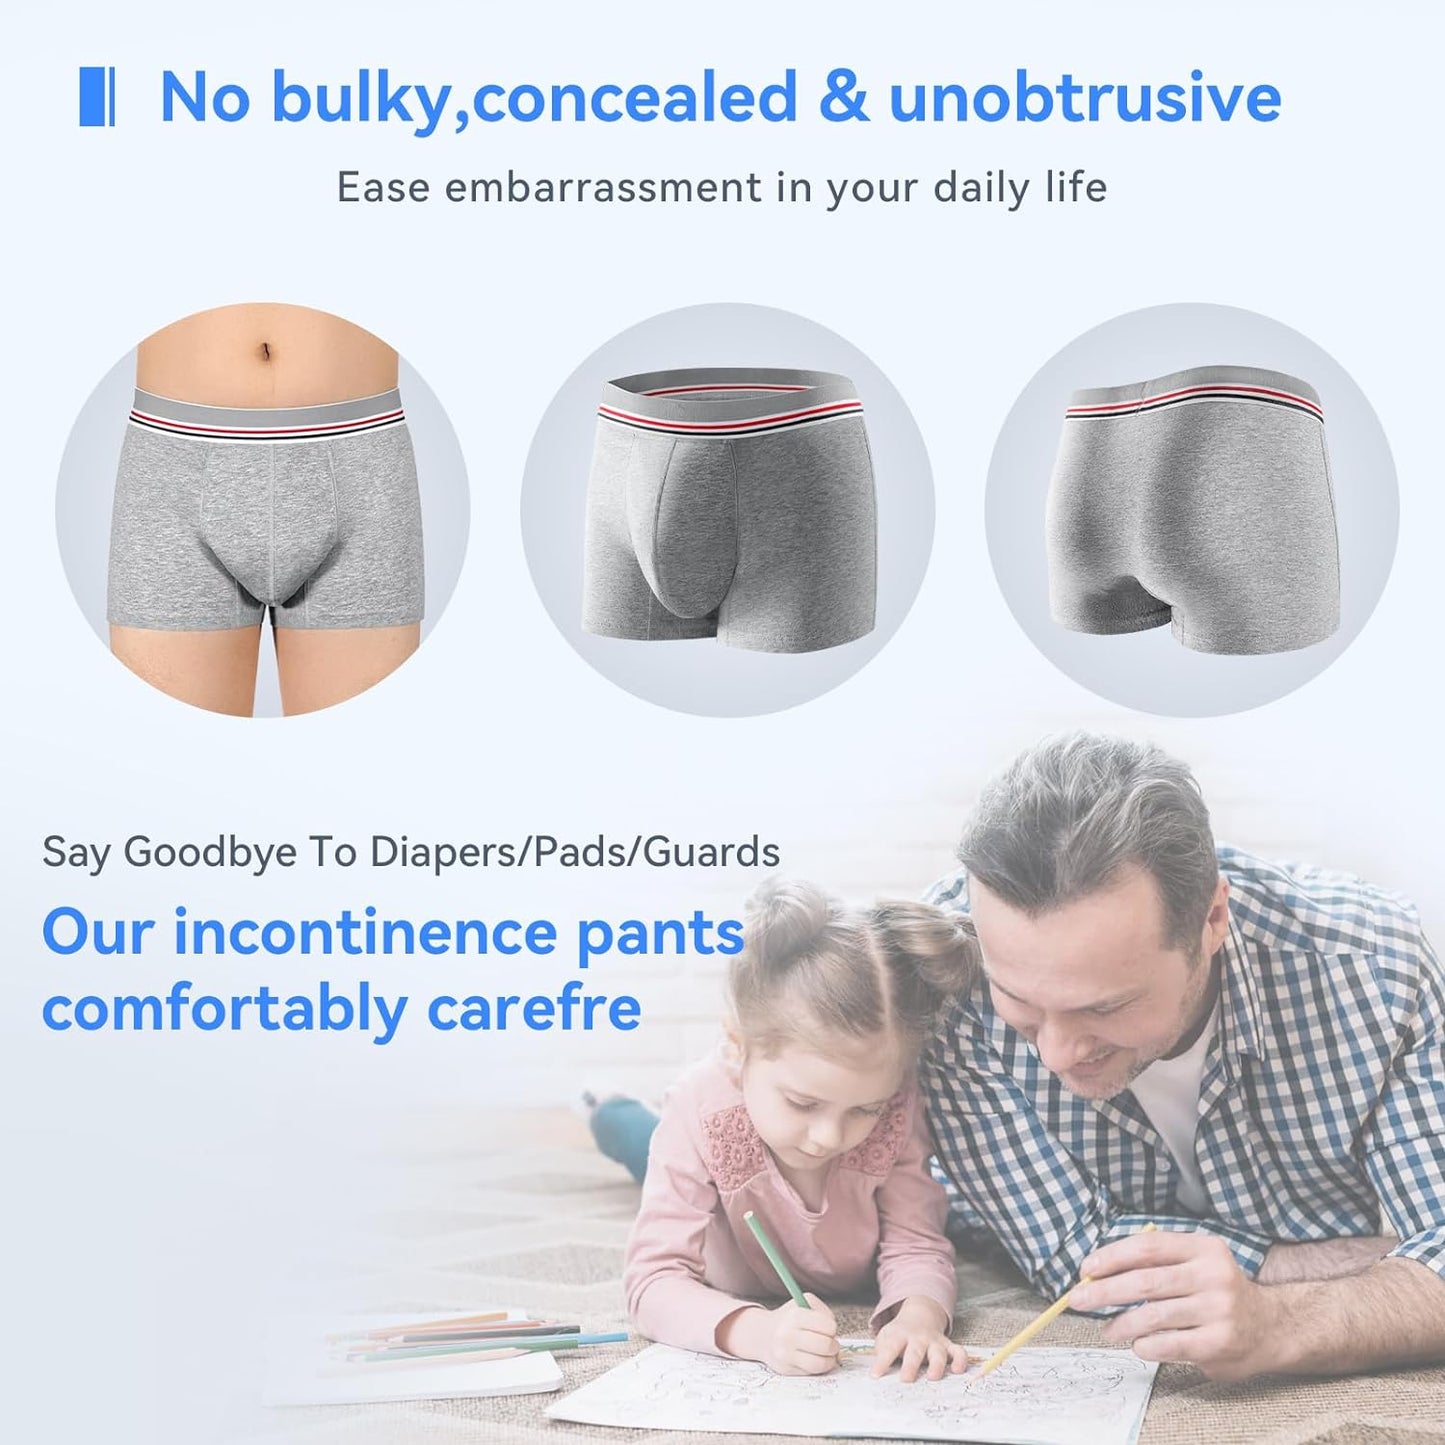 Mens Incontinence Boxer Briefs 2PCS Leakproof Urinary Incontinence Underwear for Men with Front Absorbent Area for Bladder Leakage Protection, Instant Absorbency Mens Incontinence Underwear, Medium